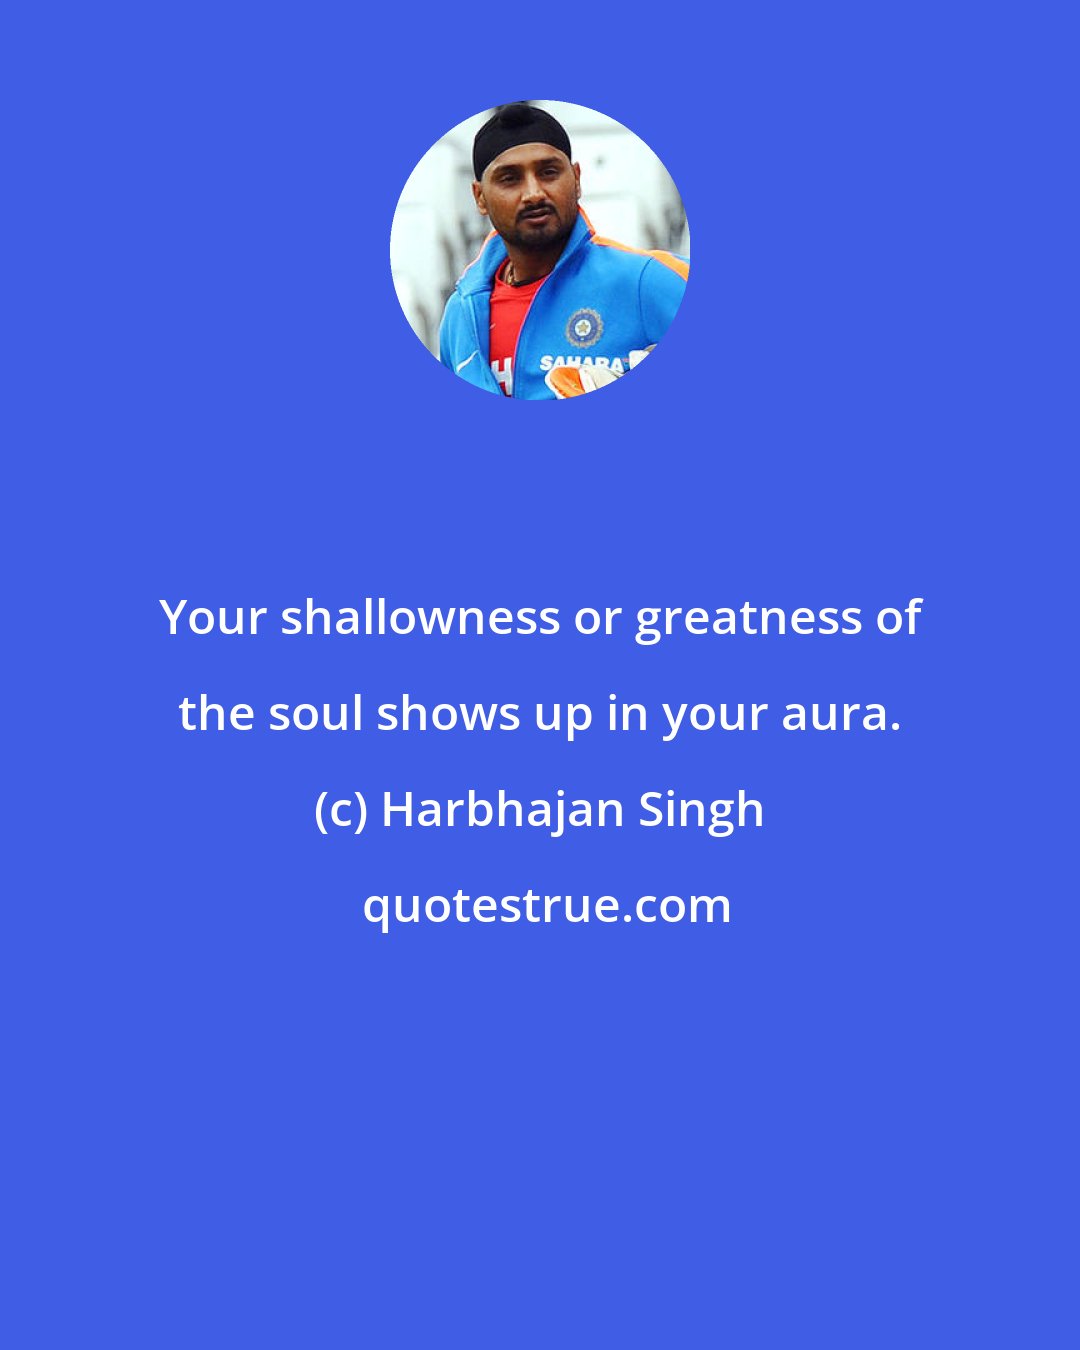 Harbhajan Singh: Your shallowness or greatness of the soul shows up in your aura.